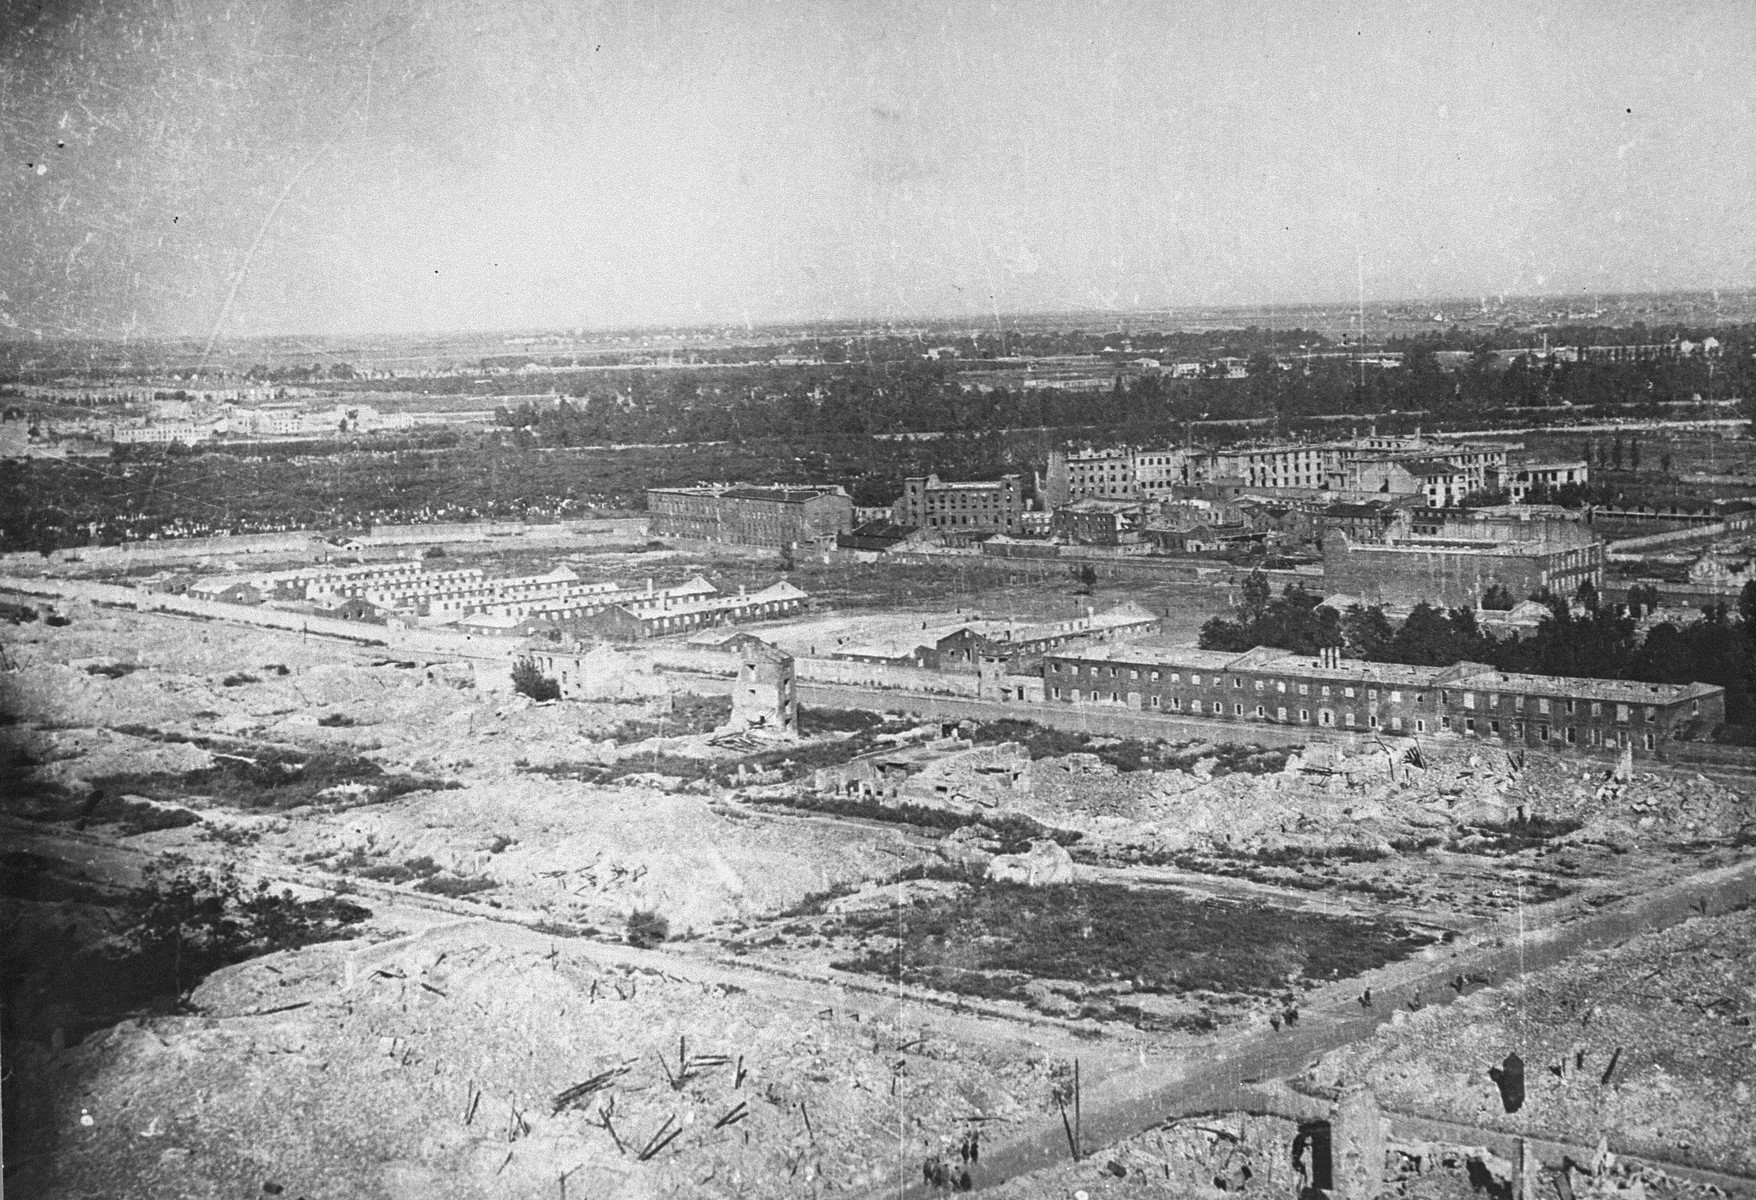 View of the ruins of the Warsaw ghetto.  

Pictured in the middle, surrounded by high wall with watch towers, is the west side of the Gesiowka prison.  The Jewish cemetery on Okopowa Street is visible in the background on the left behind Gesiowka concentration camp.